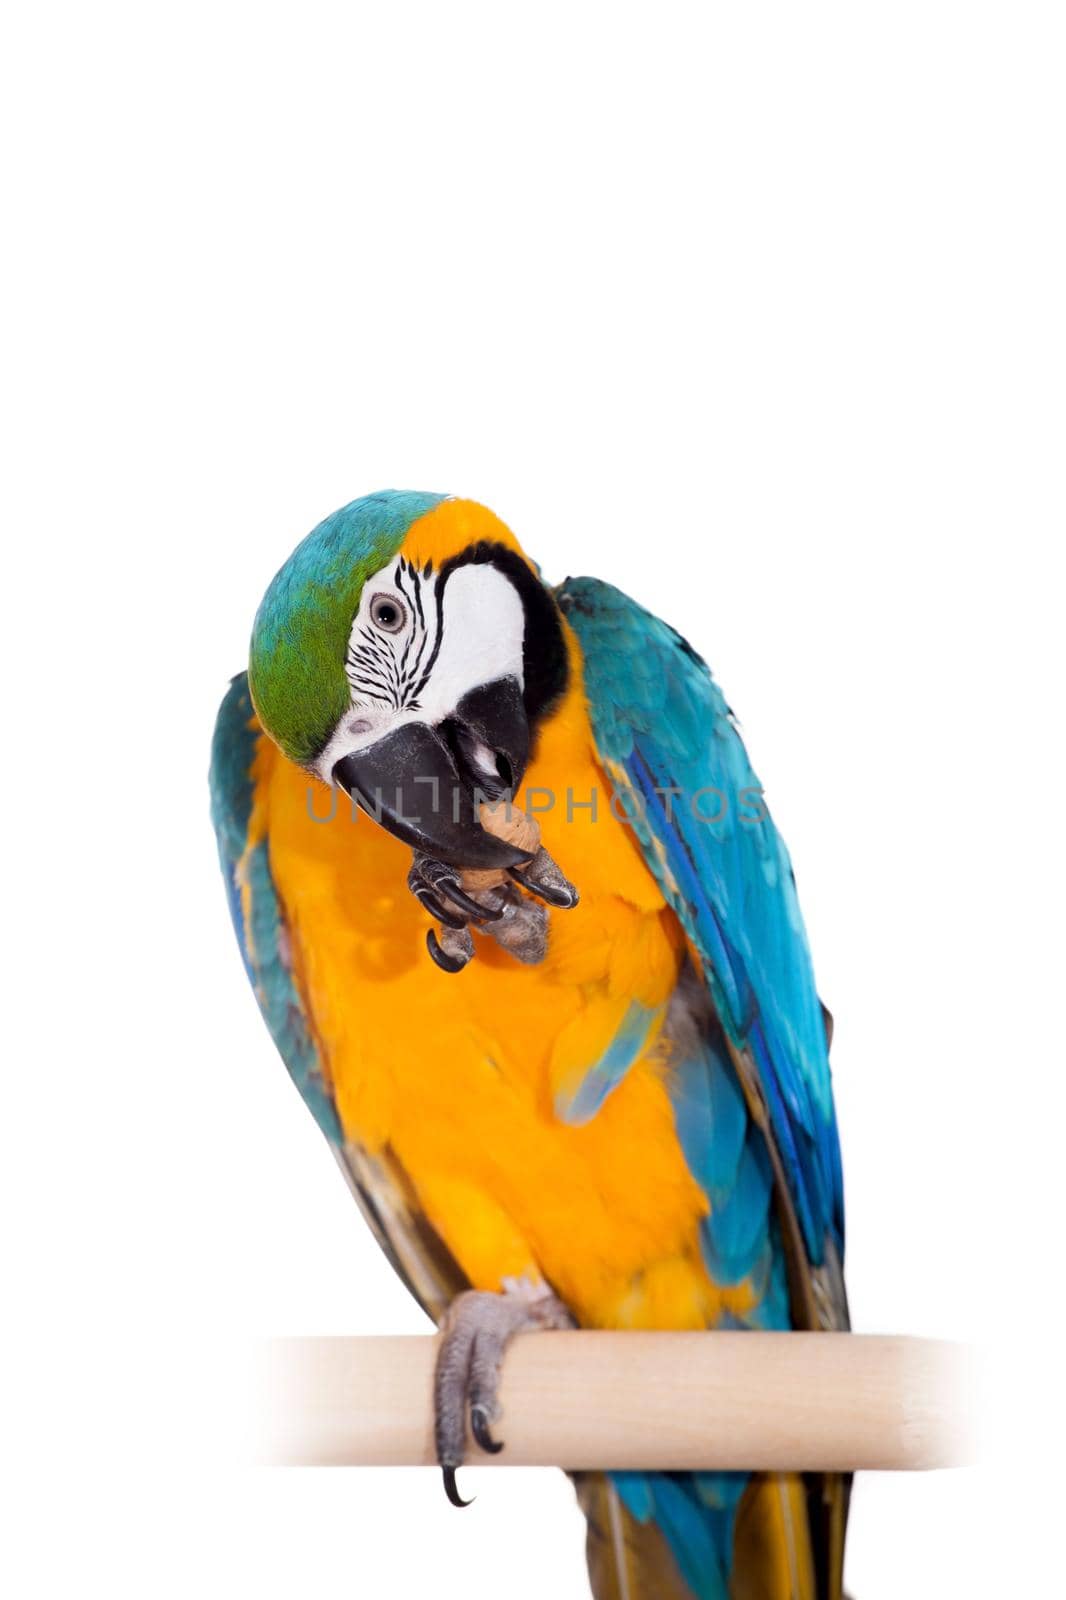 Blue and Yellow Macaw on the white background by RosaJay